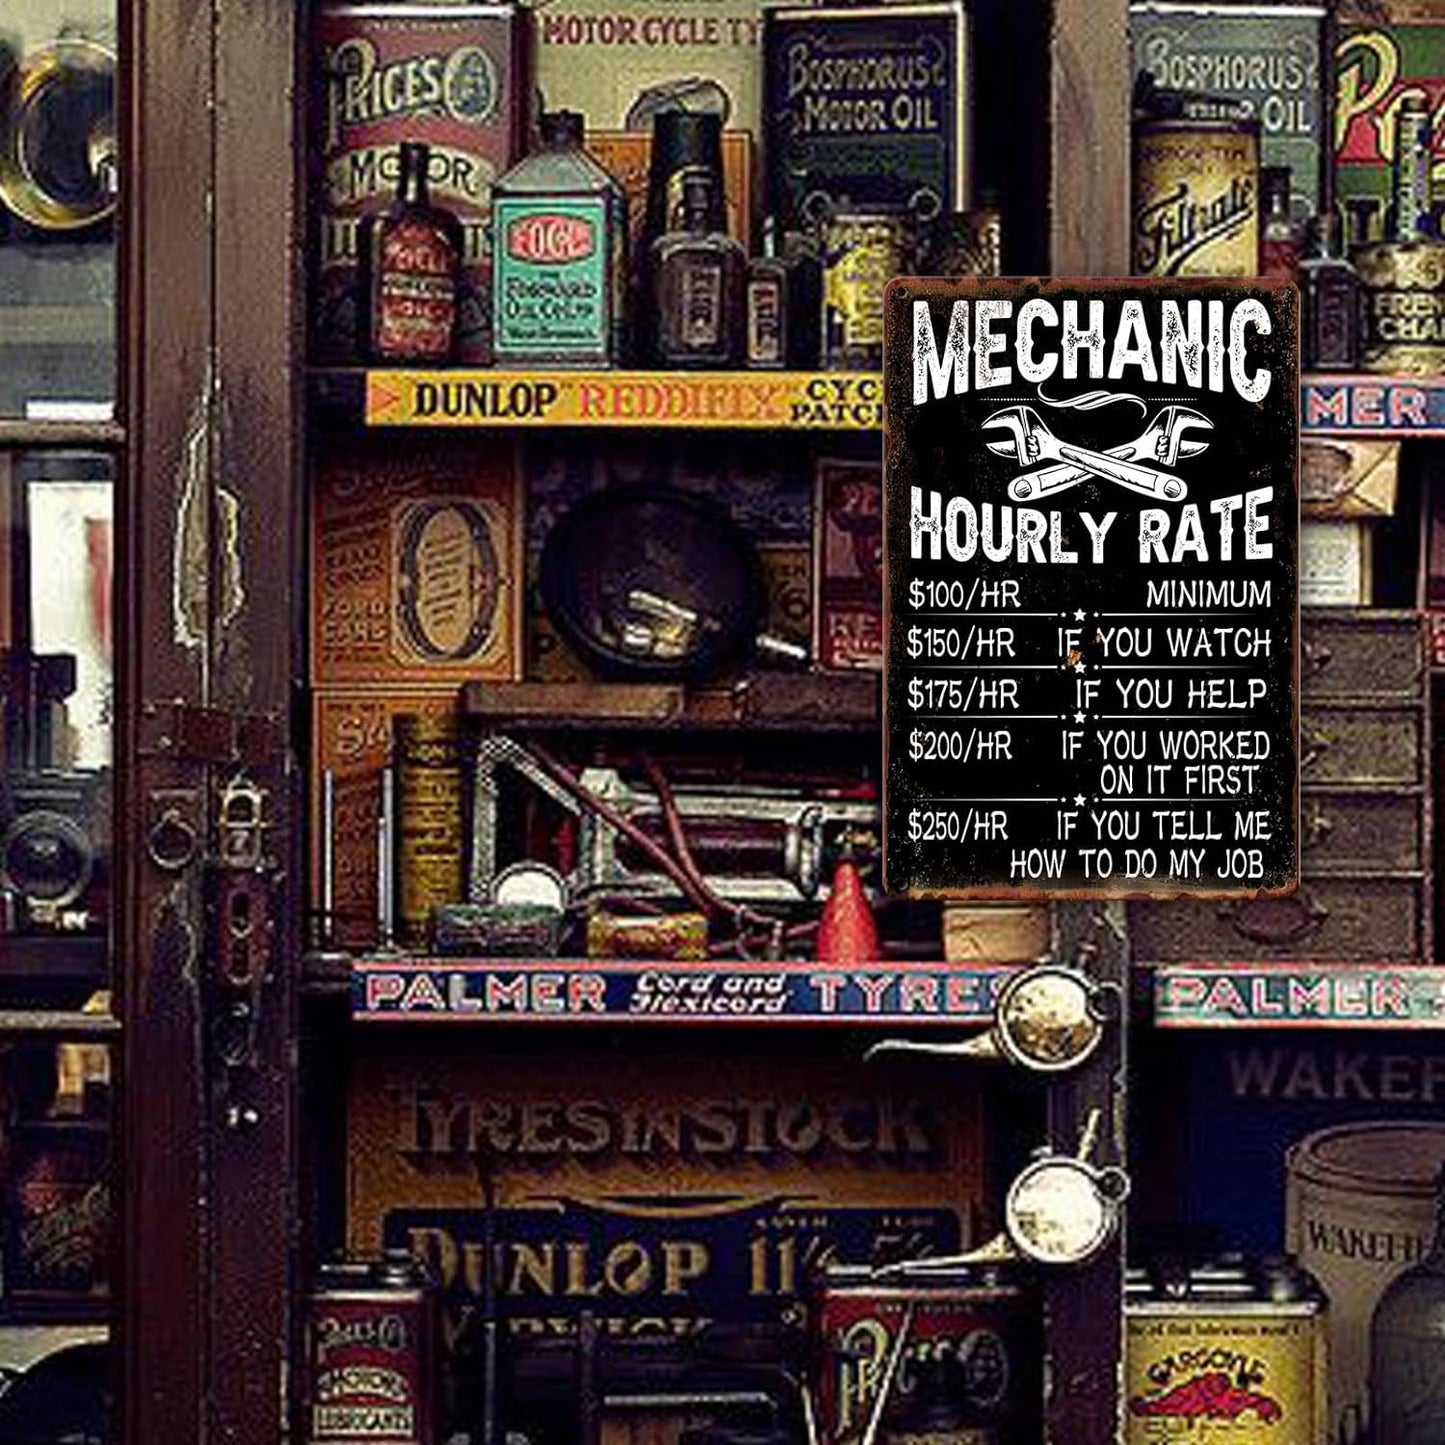 Mechanic Hourly Rate Reproduction Metal Tin Sign Mechanic Shop Decor Funny Mechanical Metal Signs Garage Shop Rates Tin Signs Vintage Wall Decor Metal Art Mechanic Car Signs Decor Maintenance Workshop Plaque 12x8 Inch